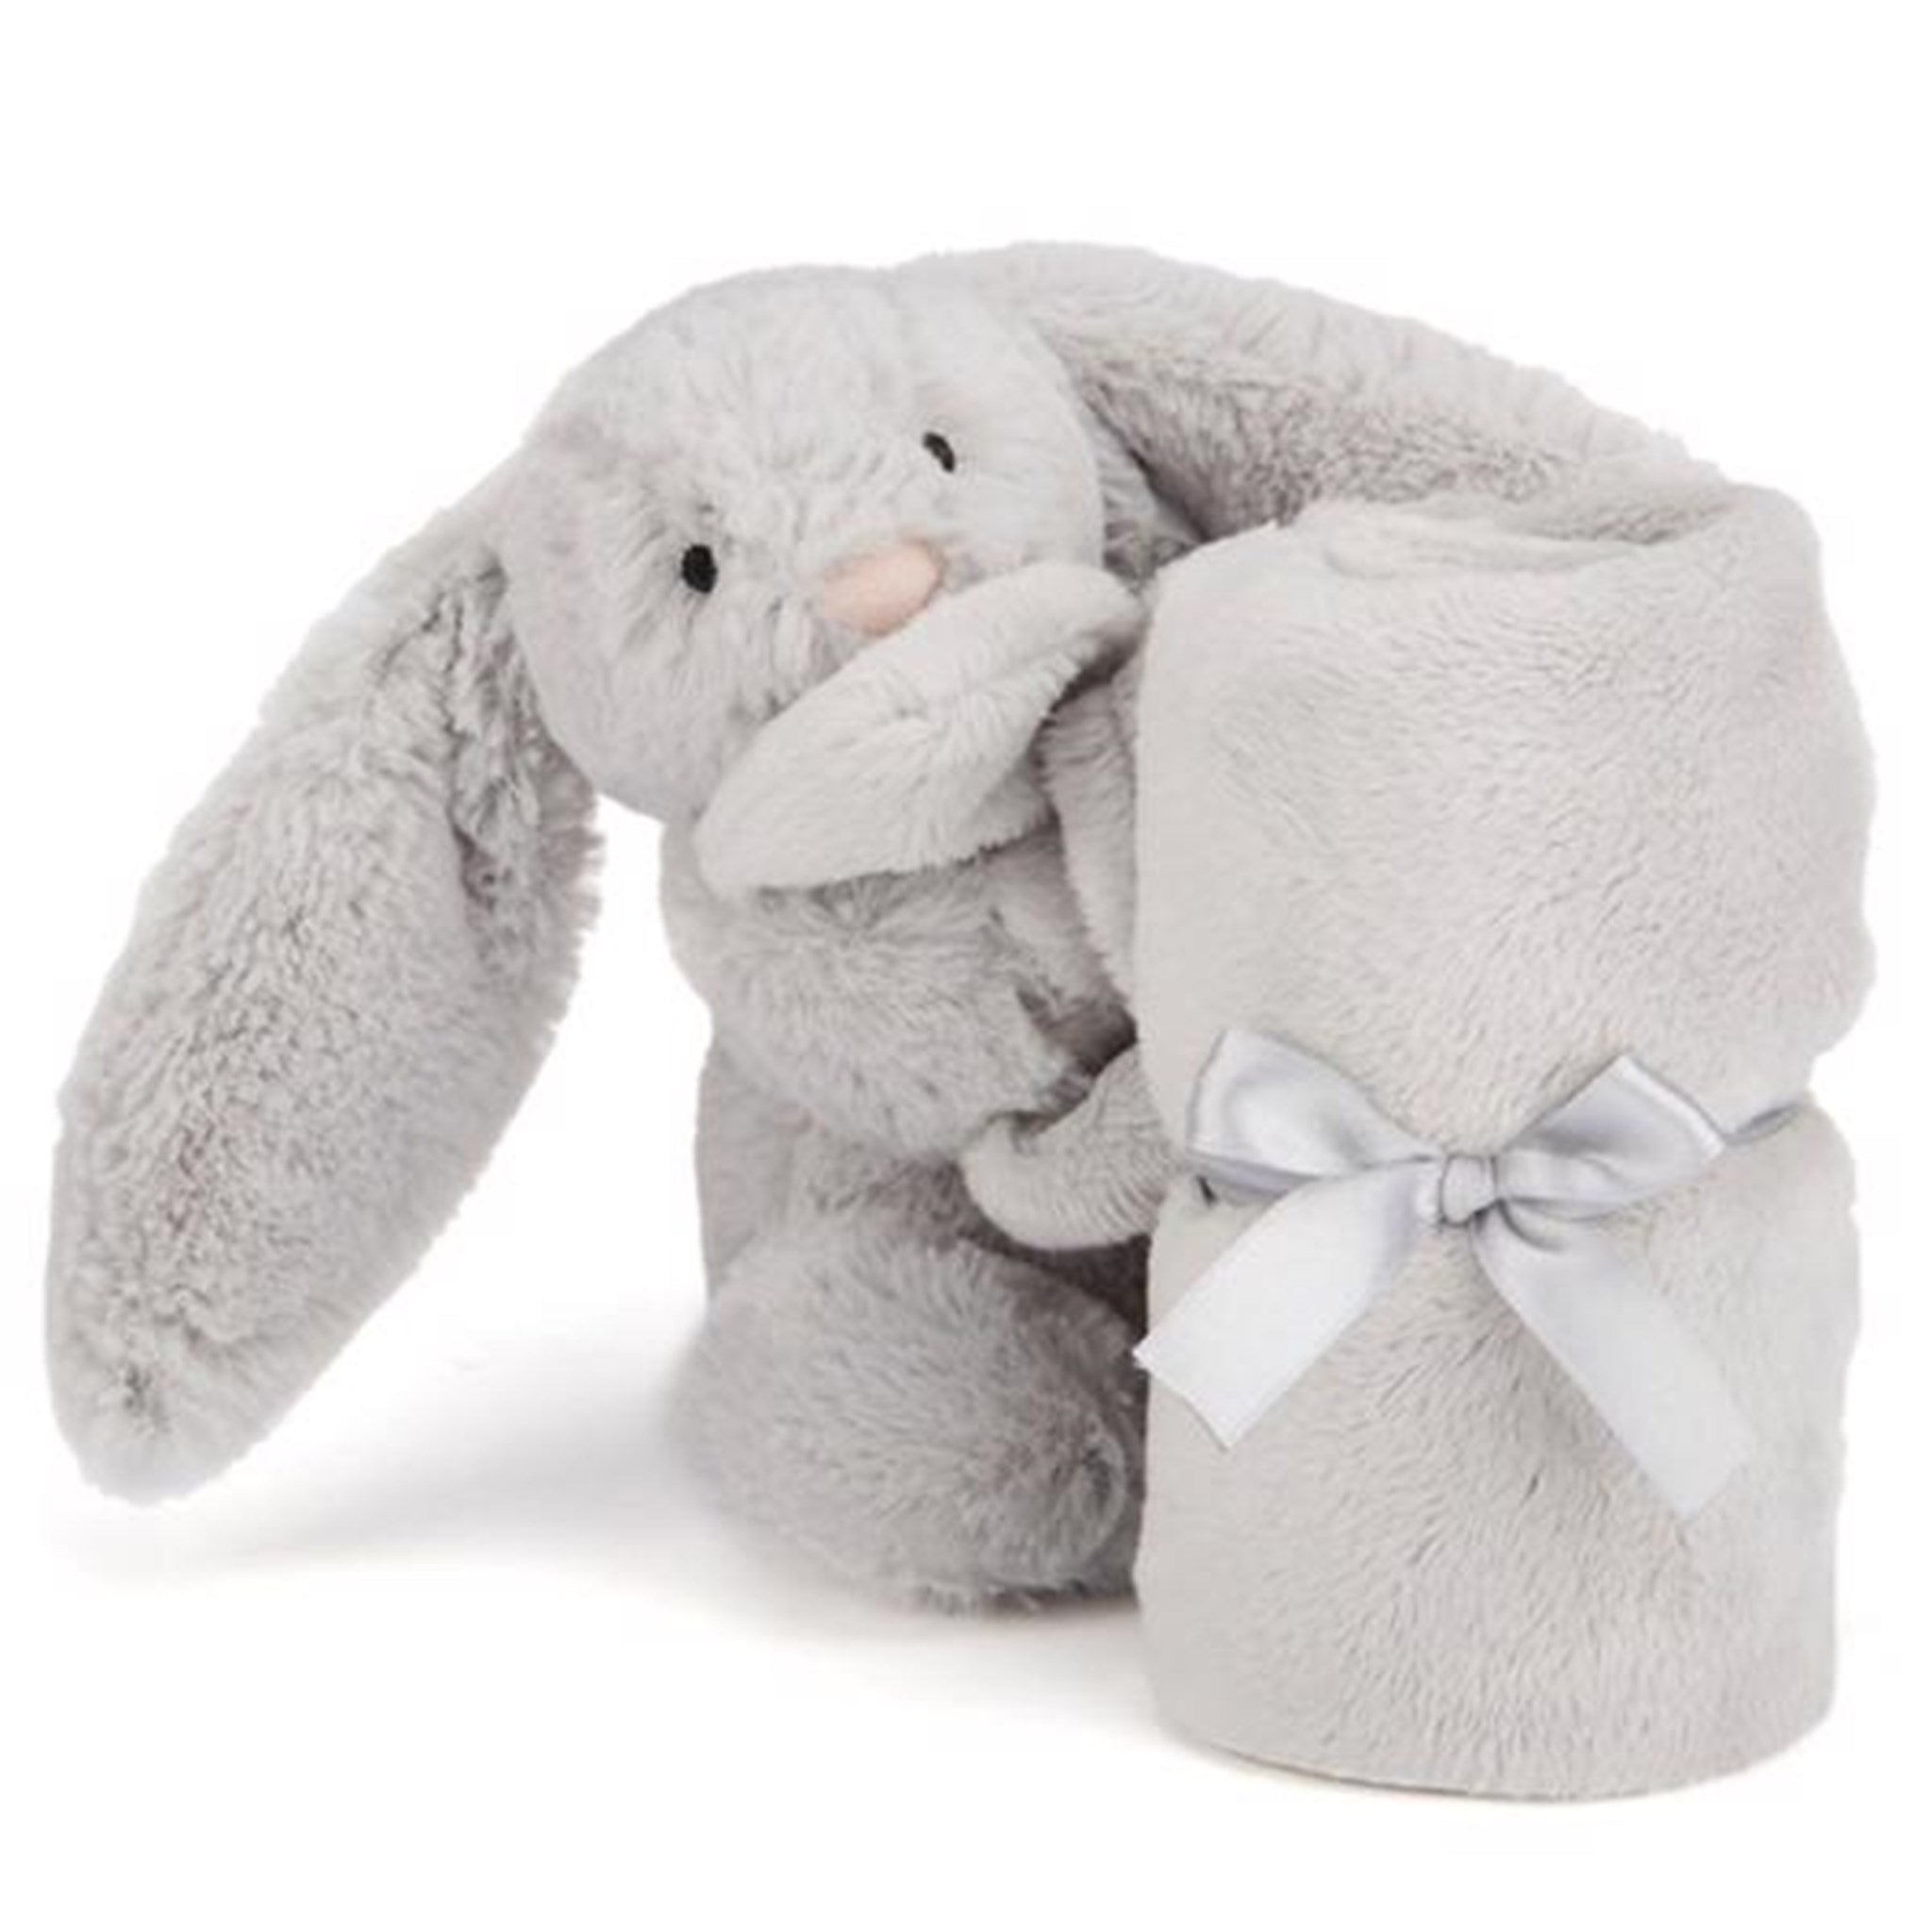 Jellycat Bashful Rabbit Soother Silver 2